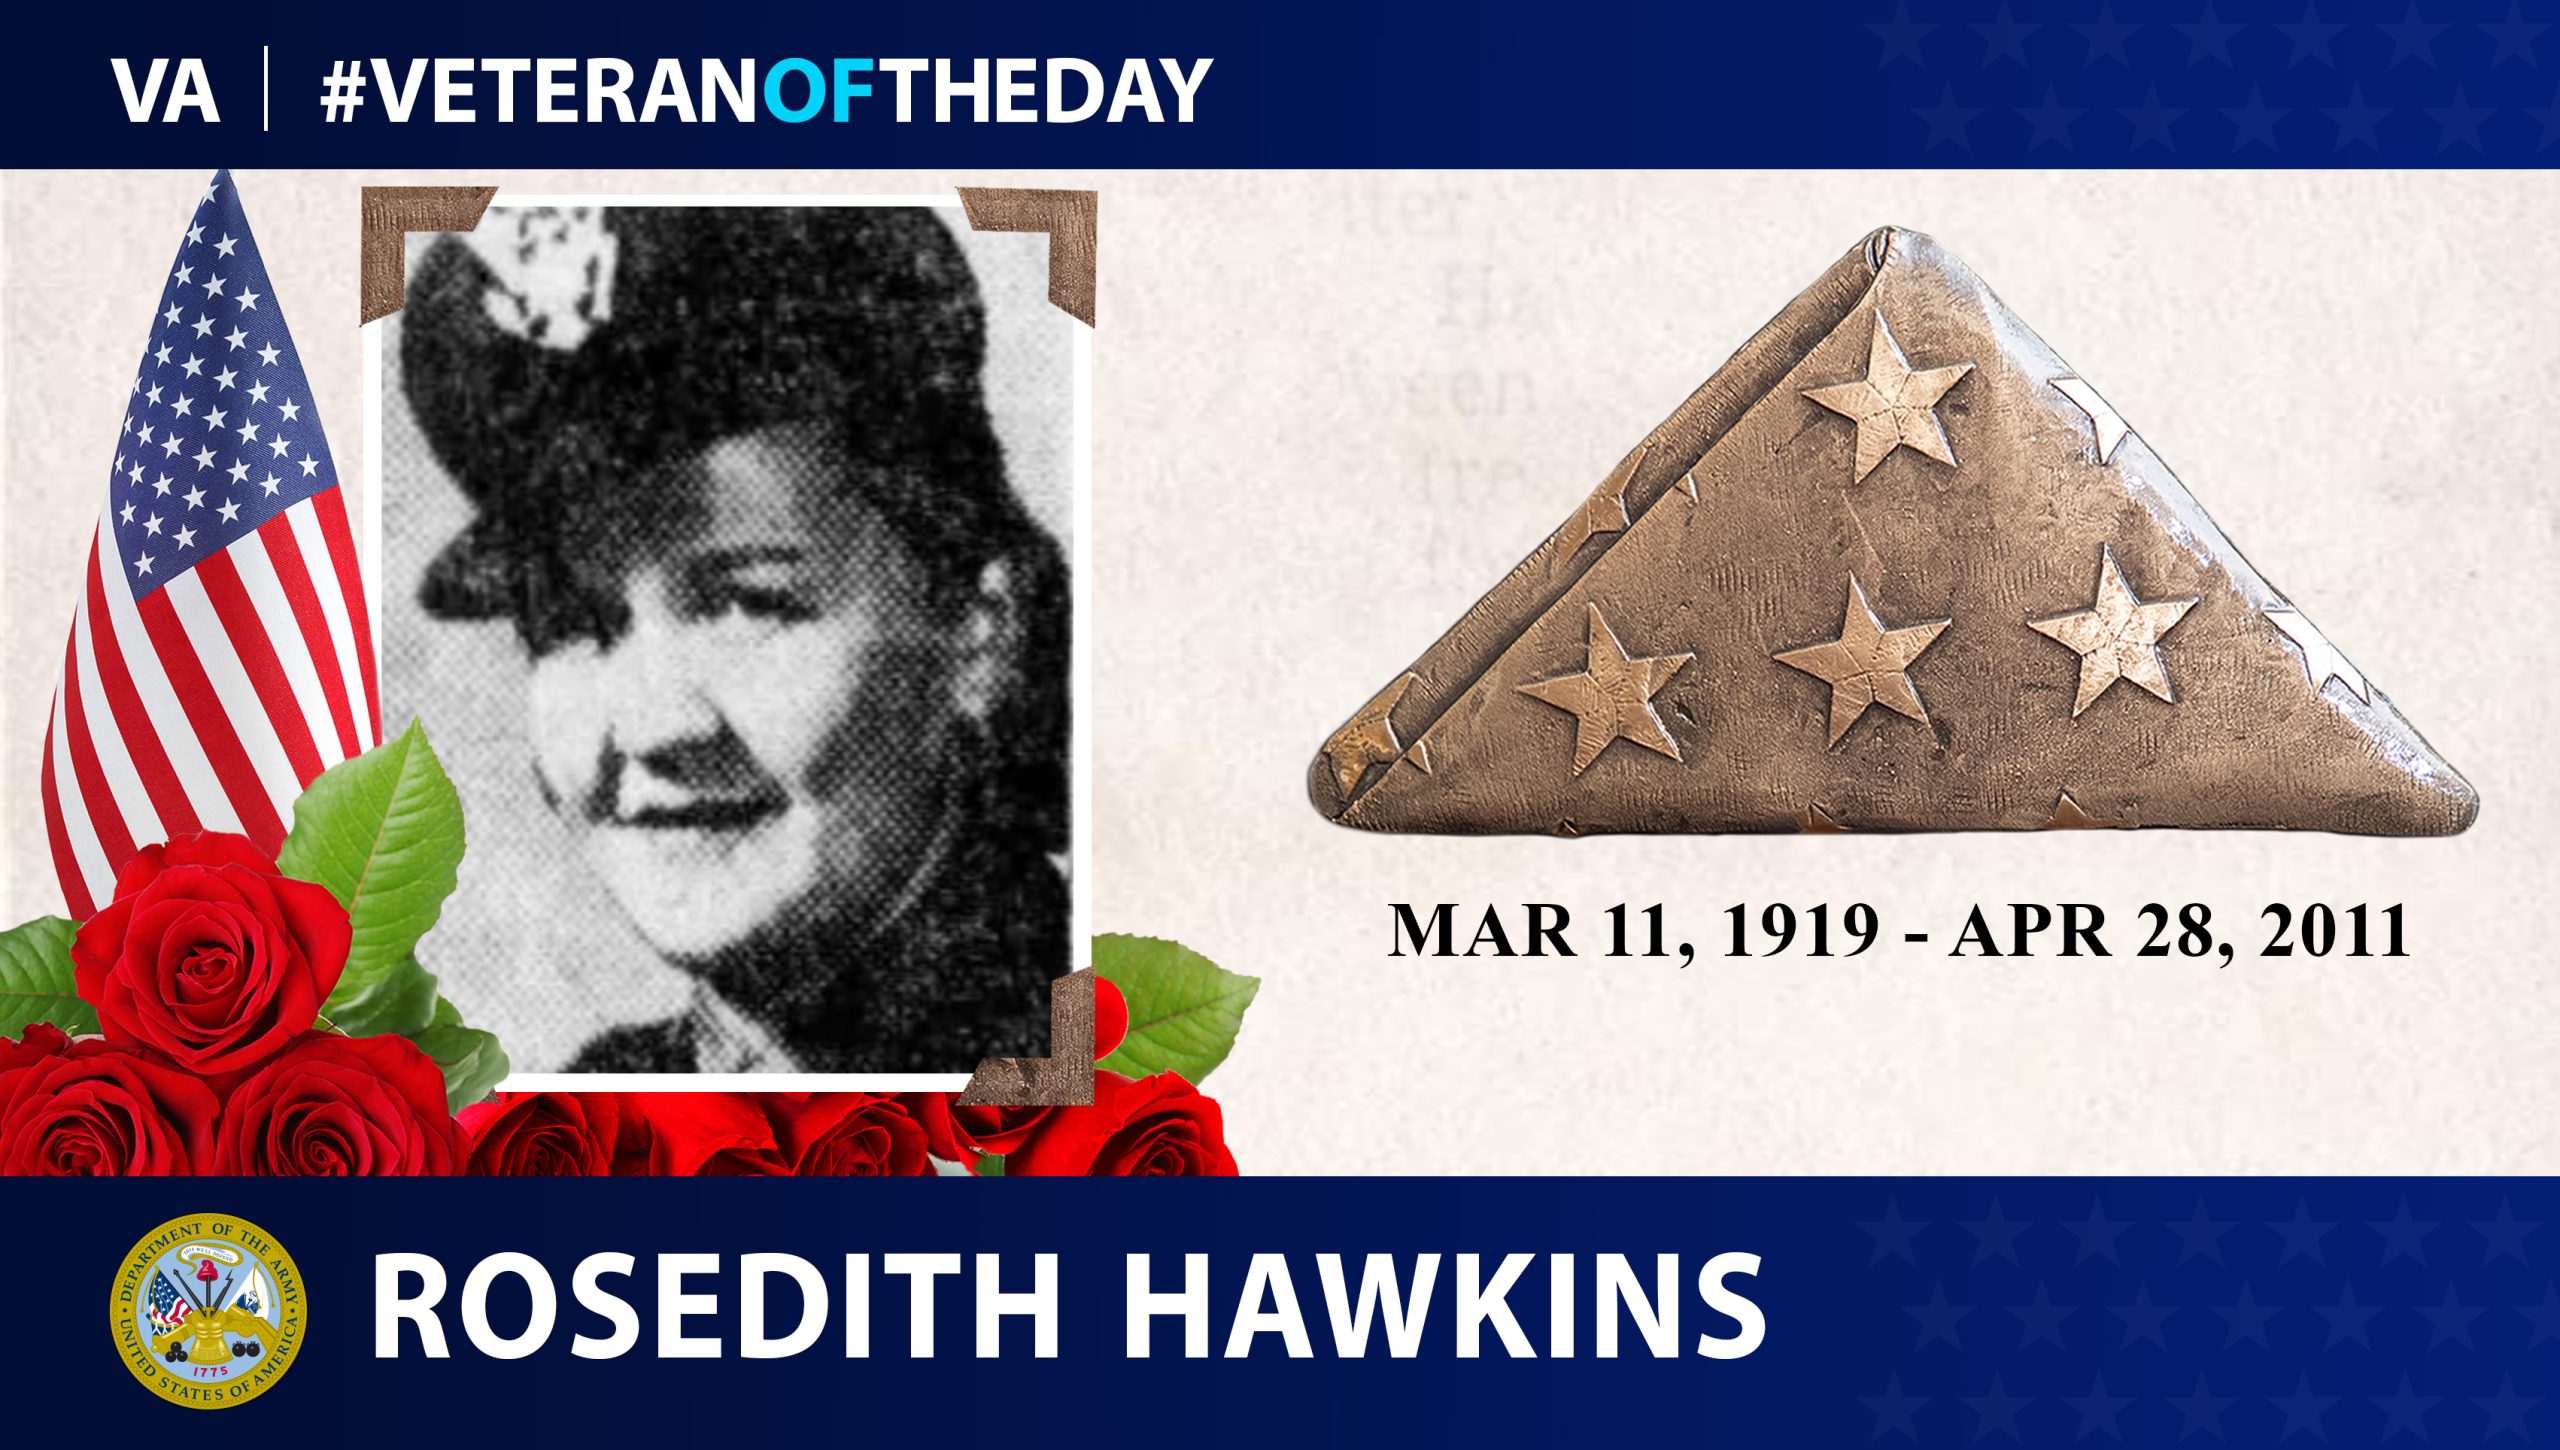 Today's #VeteranOfTheDay is Army Veteran Rosedith Hawkins, who served as a nurse during World War II.